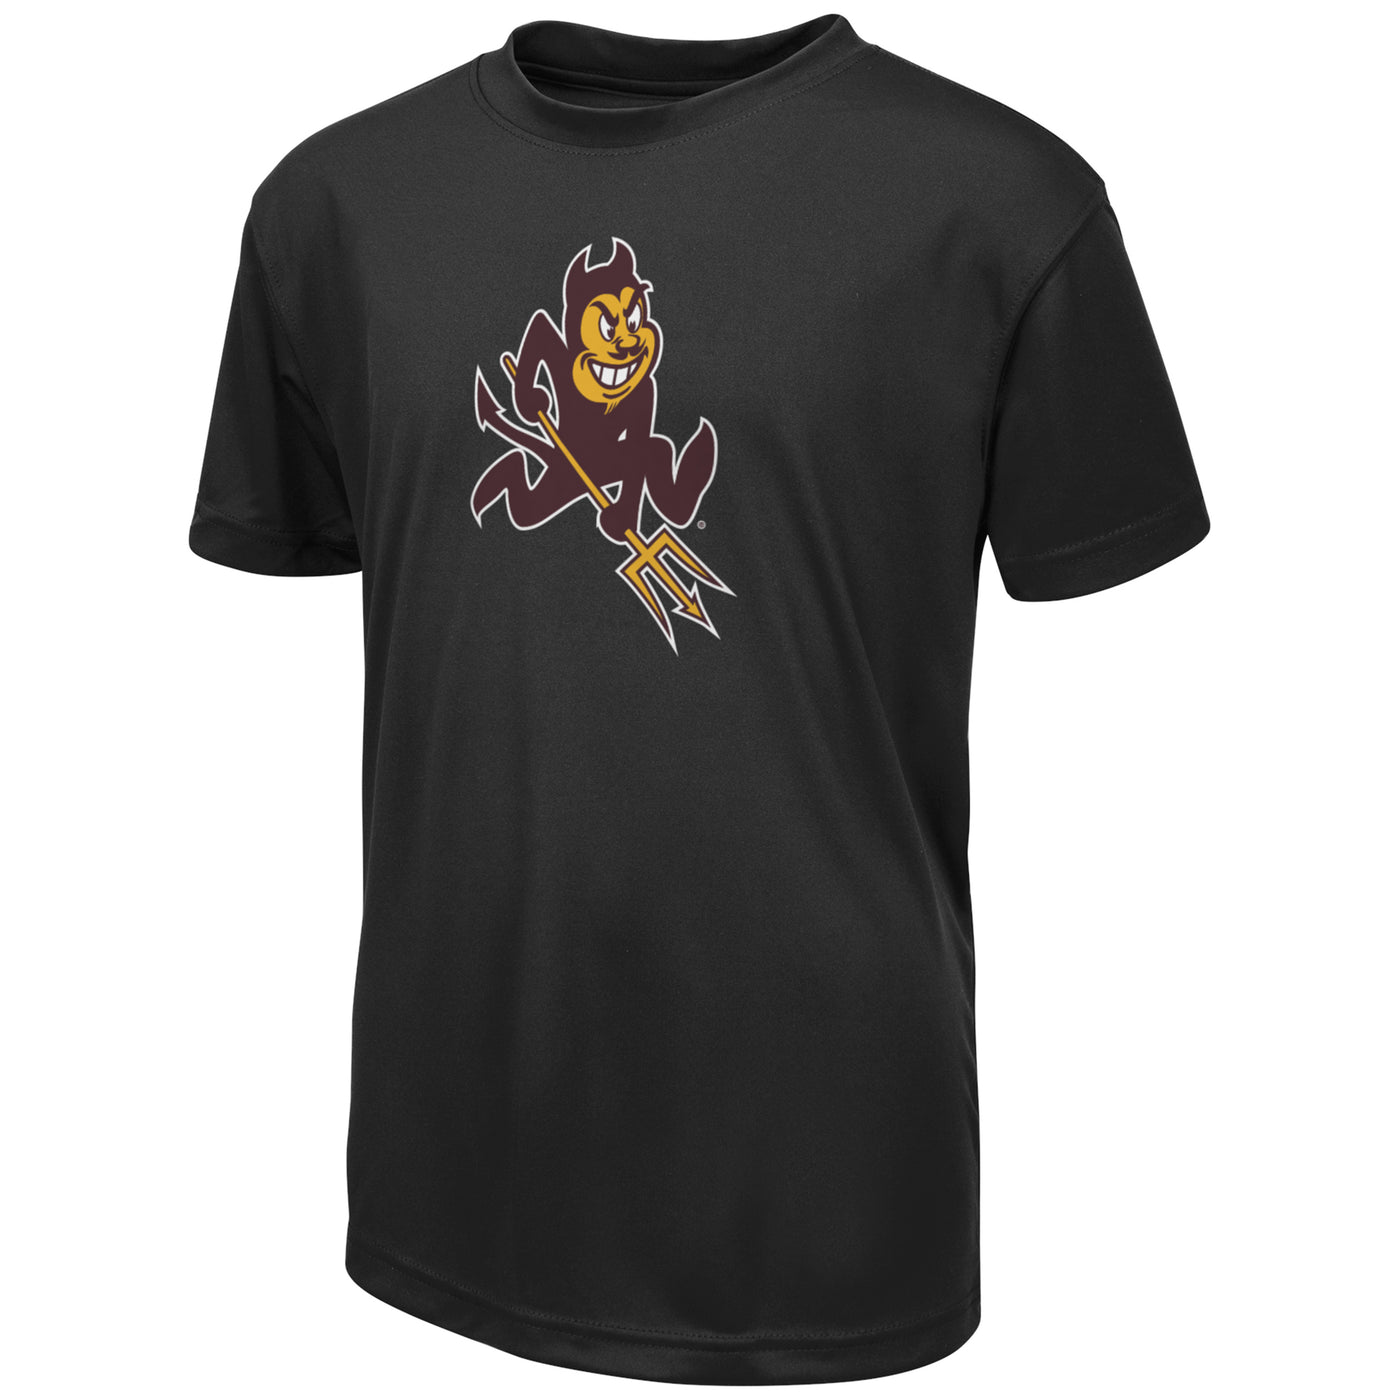 ASU black youth tee with Sparky print